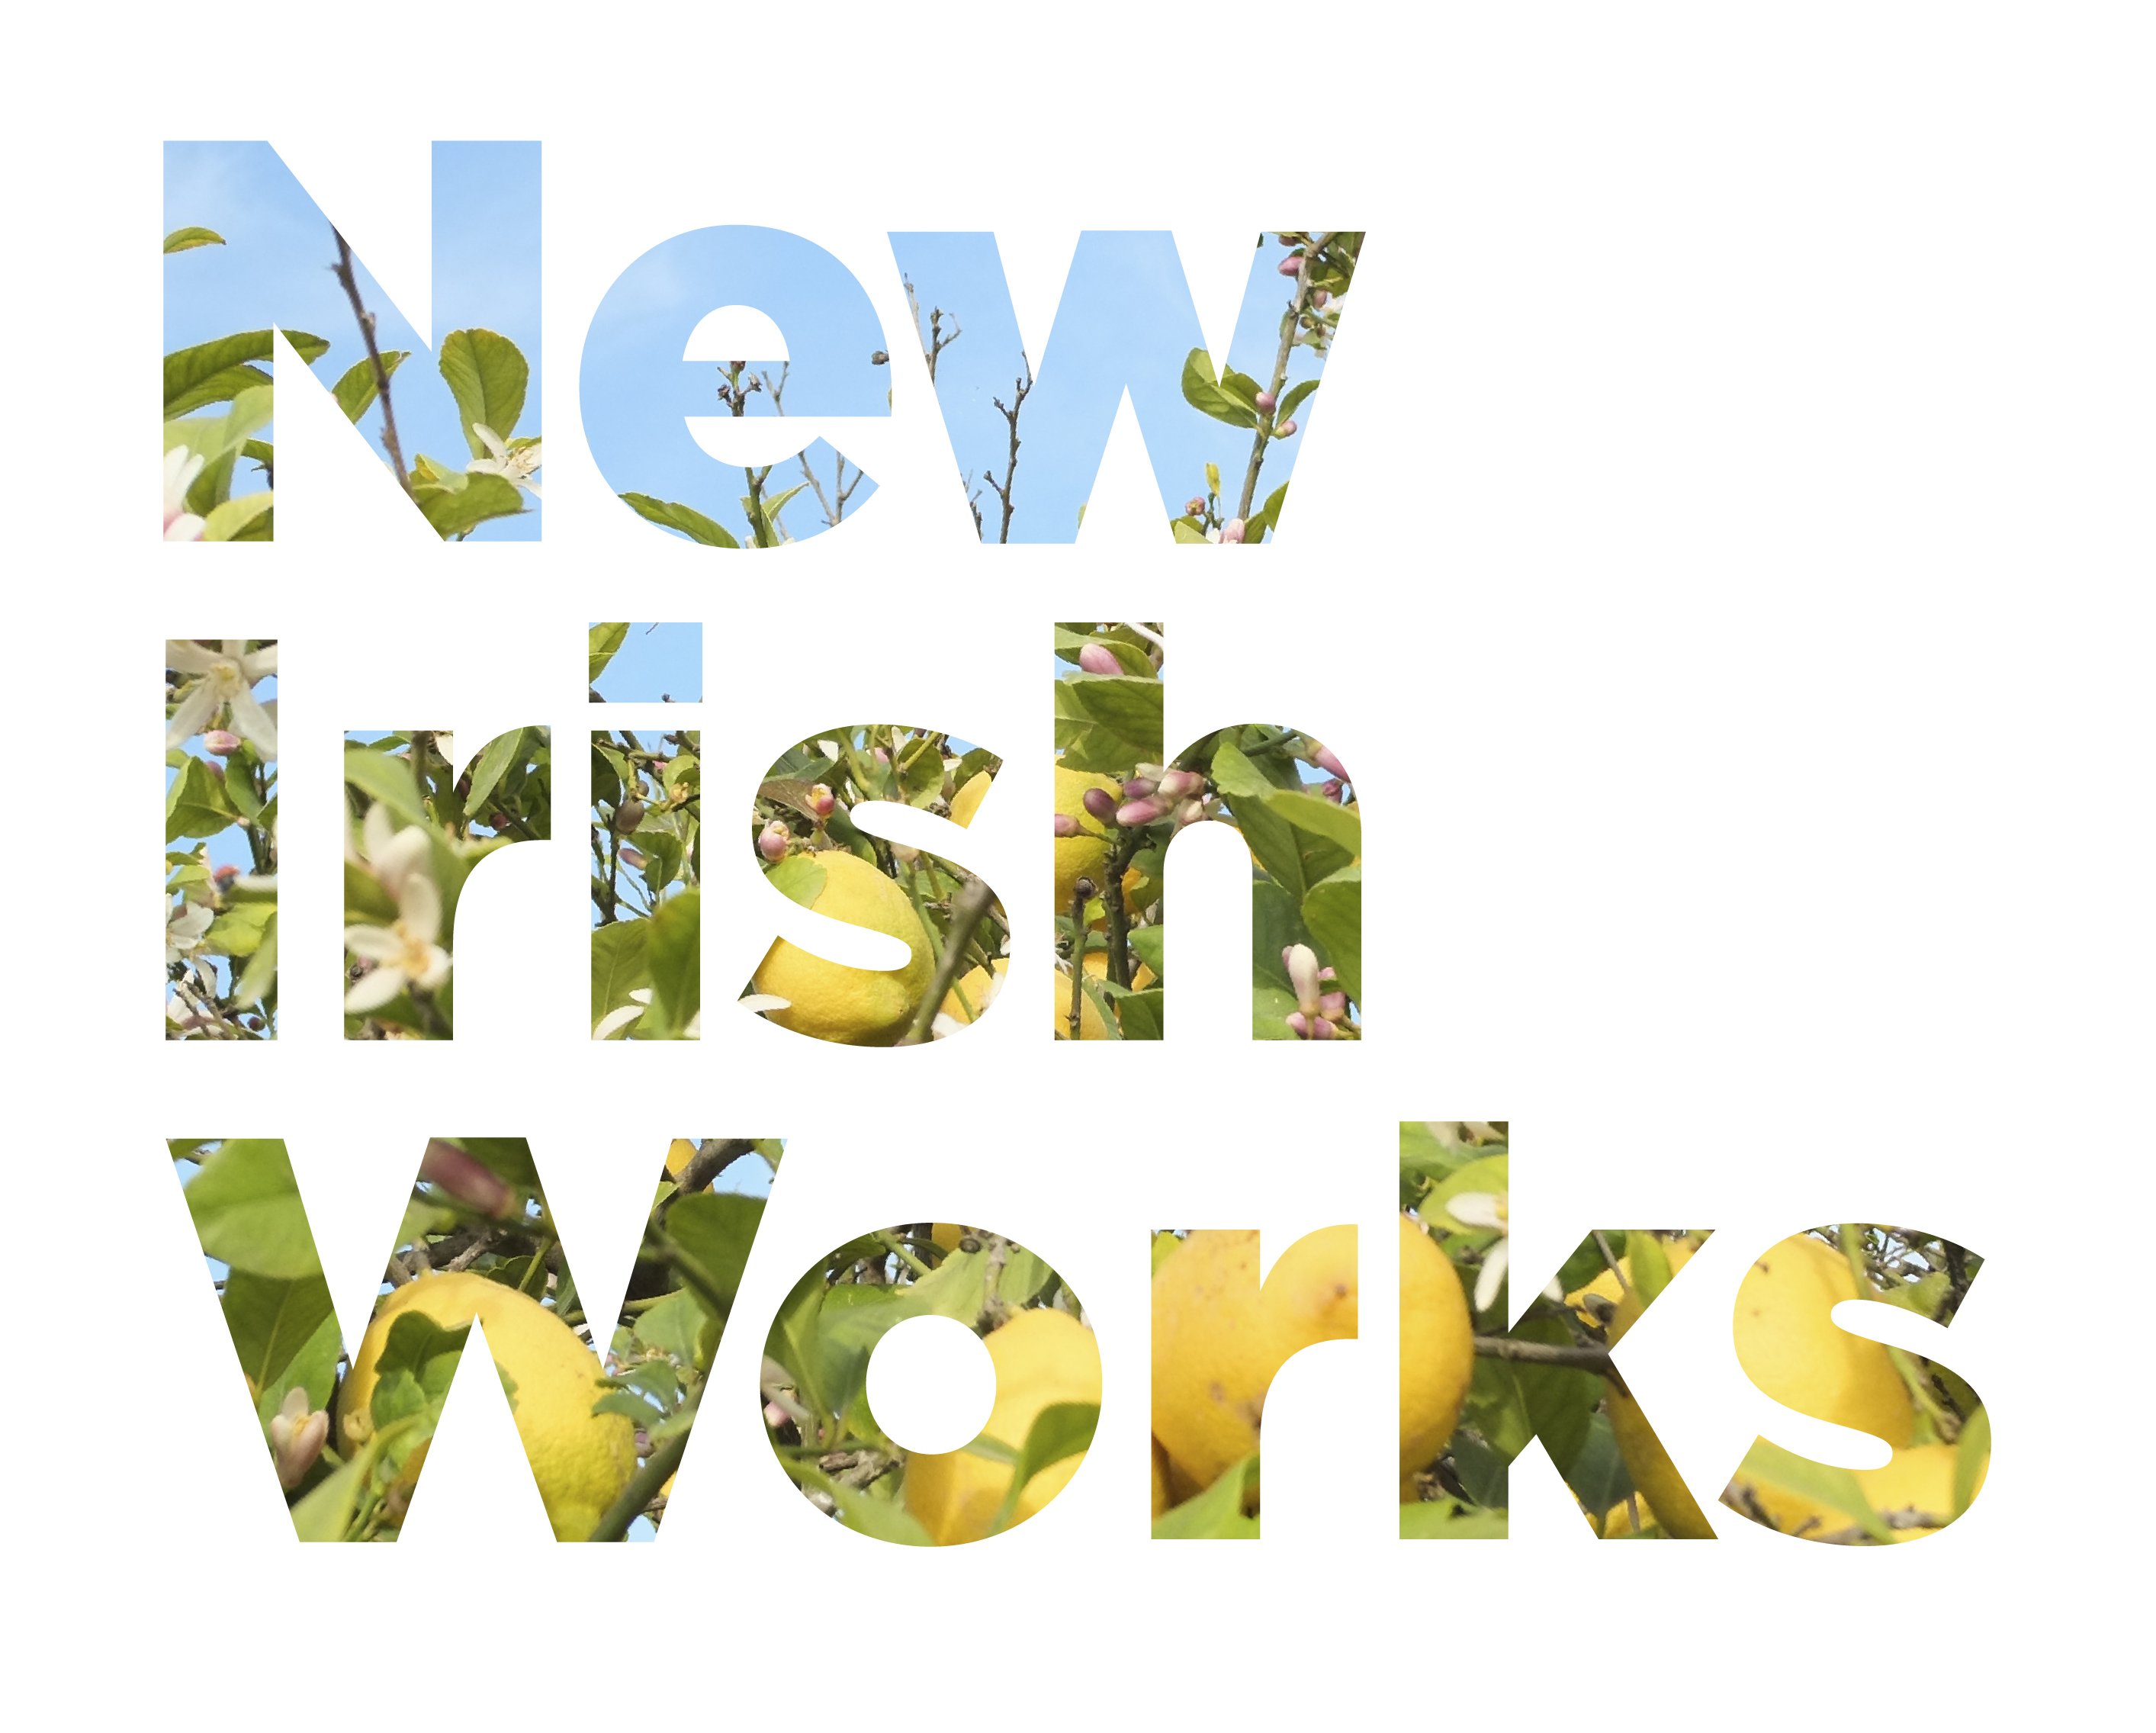 New Irish Works, The Library Project - headstuff.org